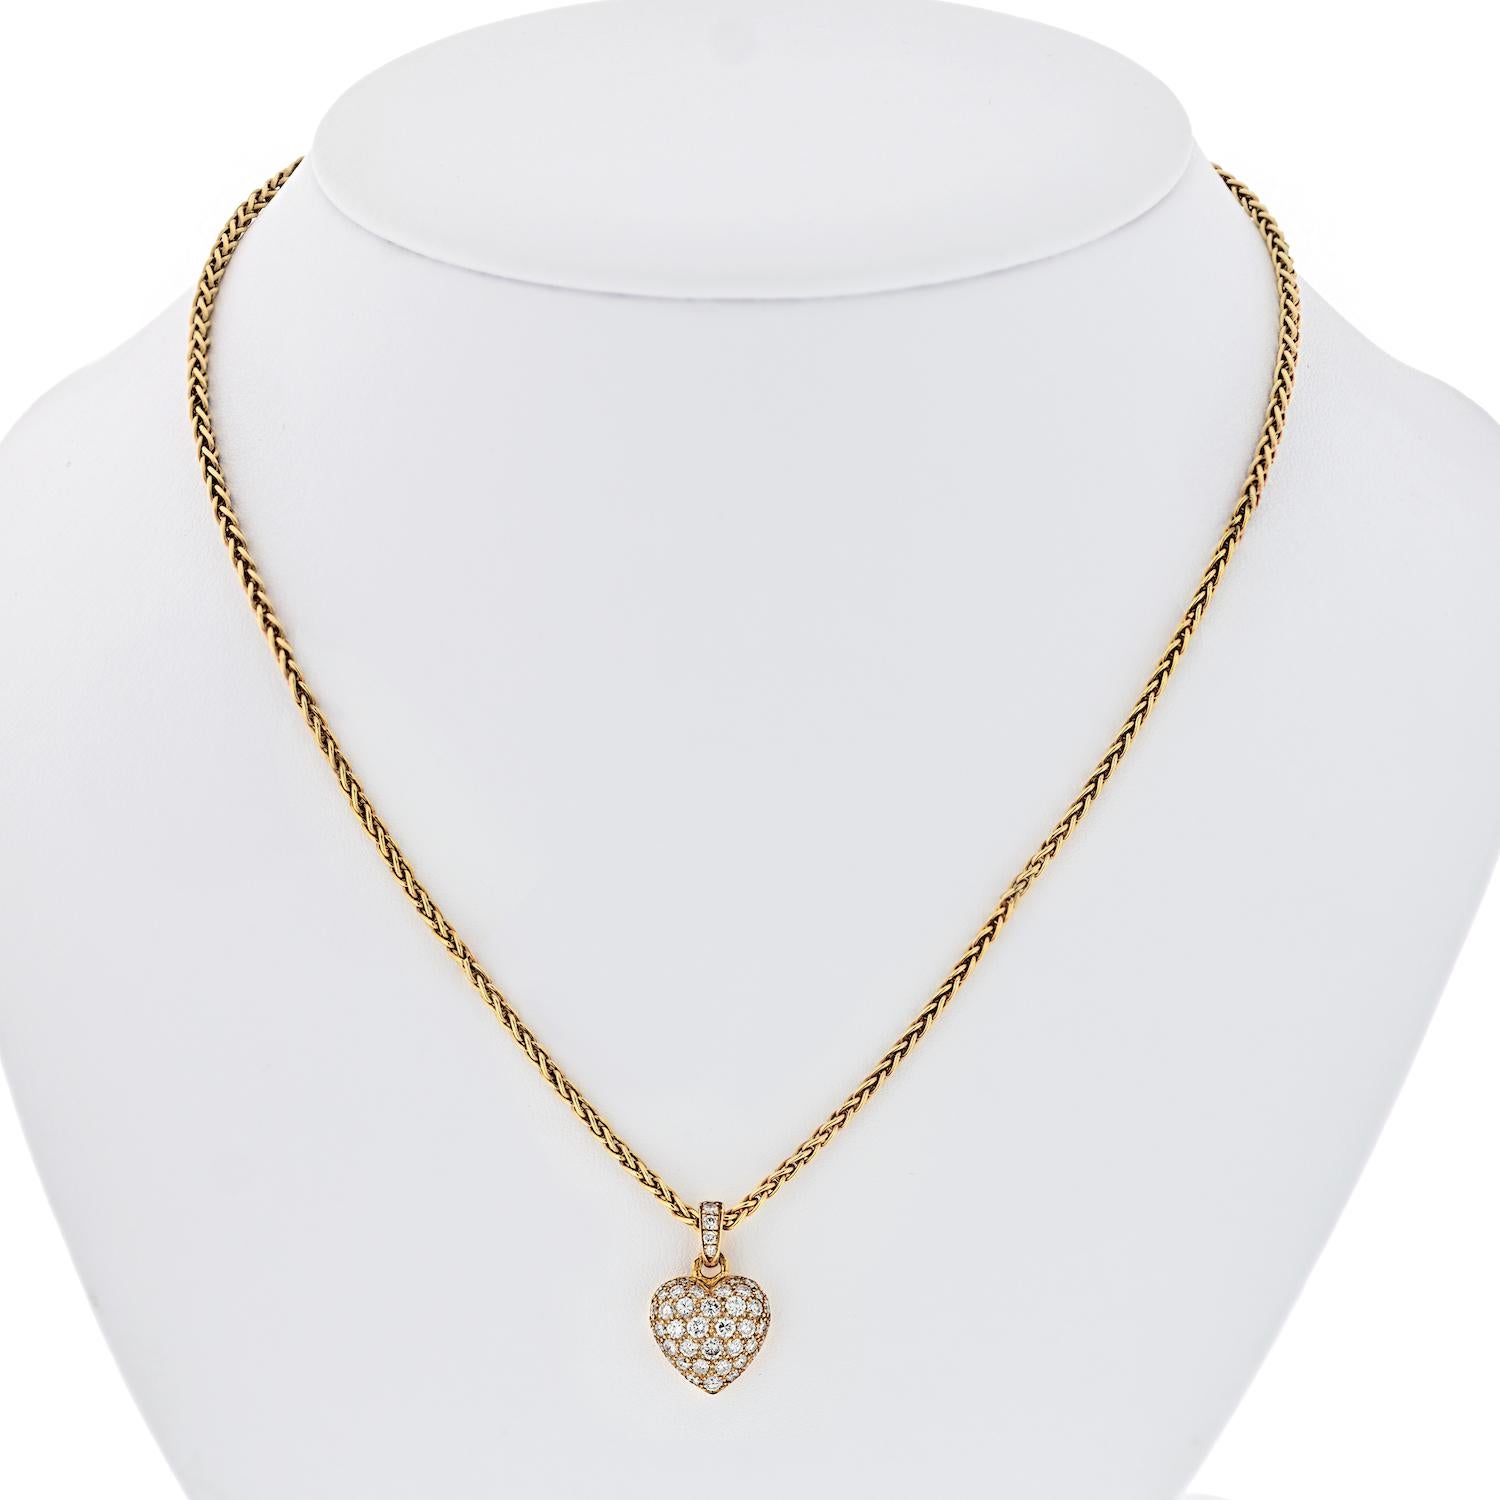 Round Cut Cartier Rose Gold Pave Diamond Heart Pendant on a Chain Necklace